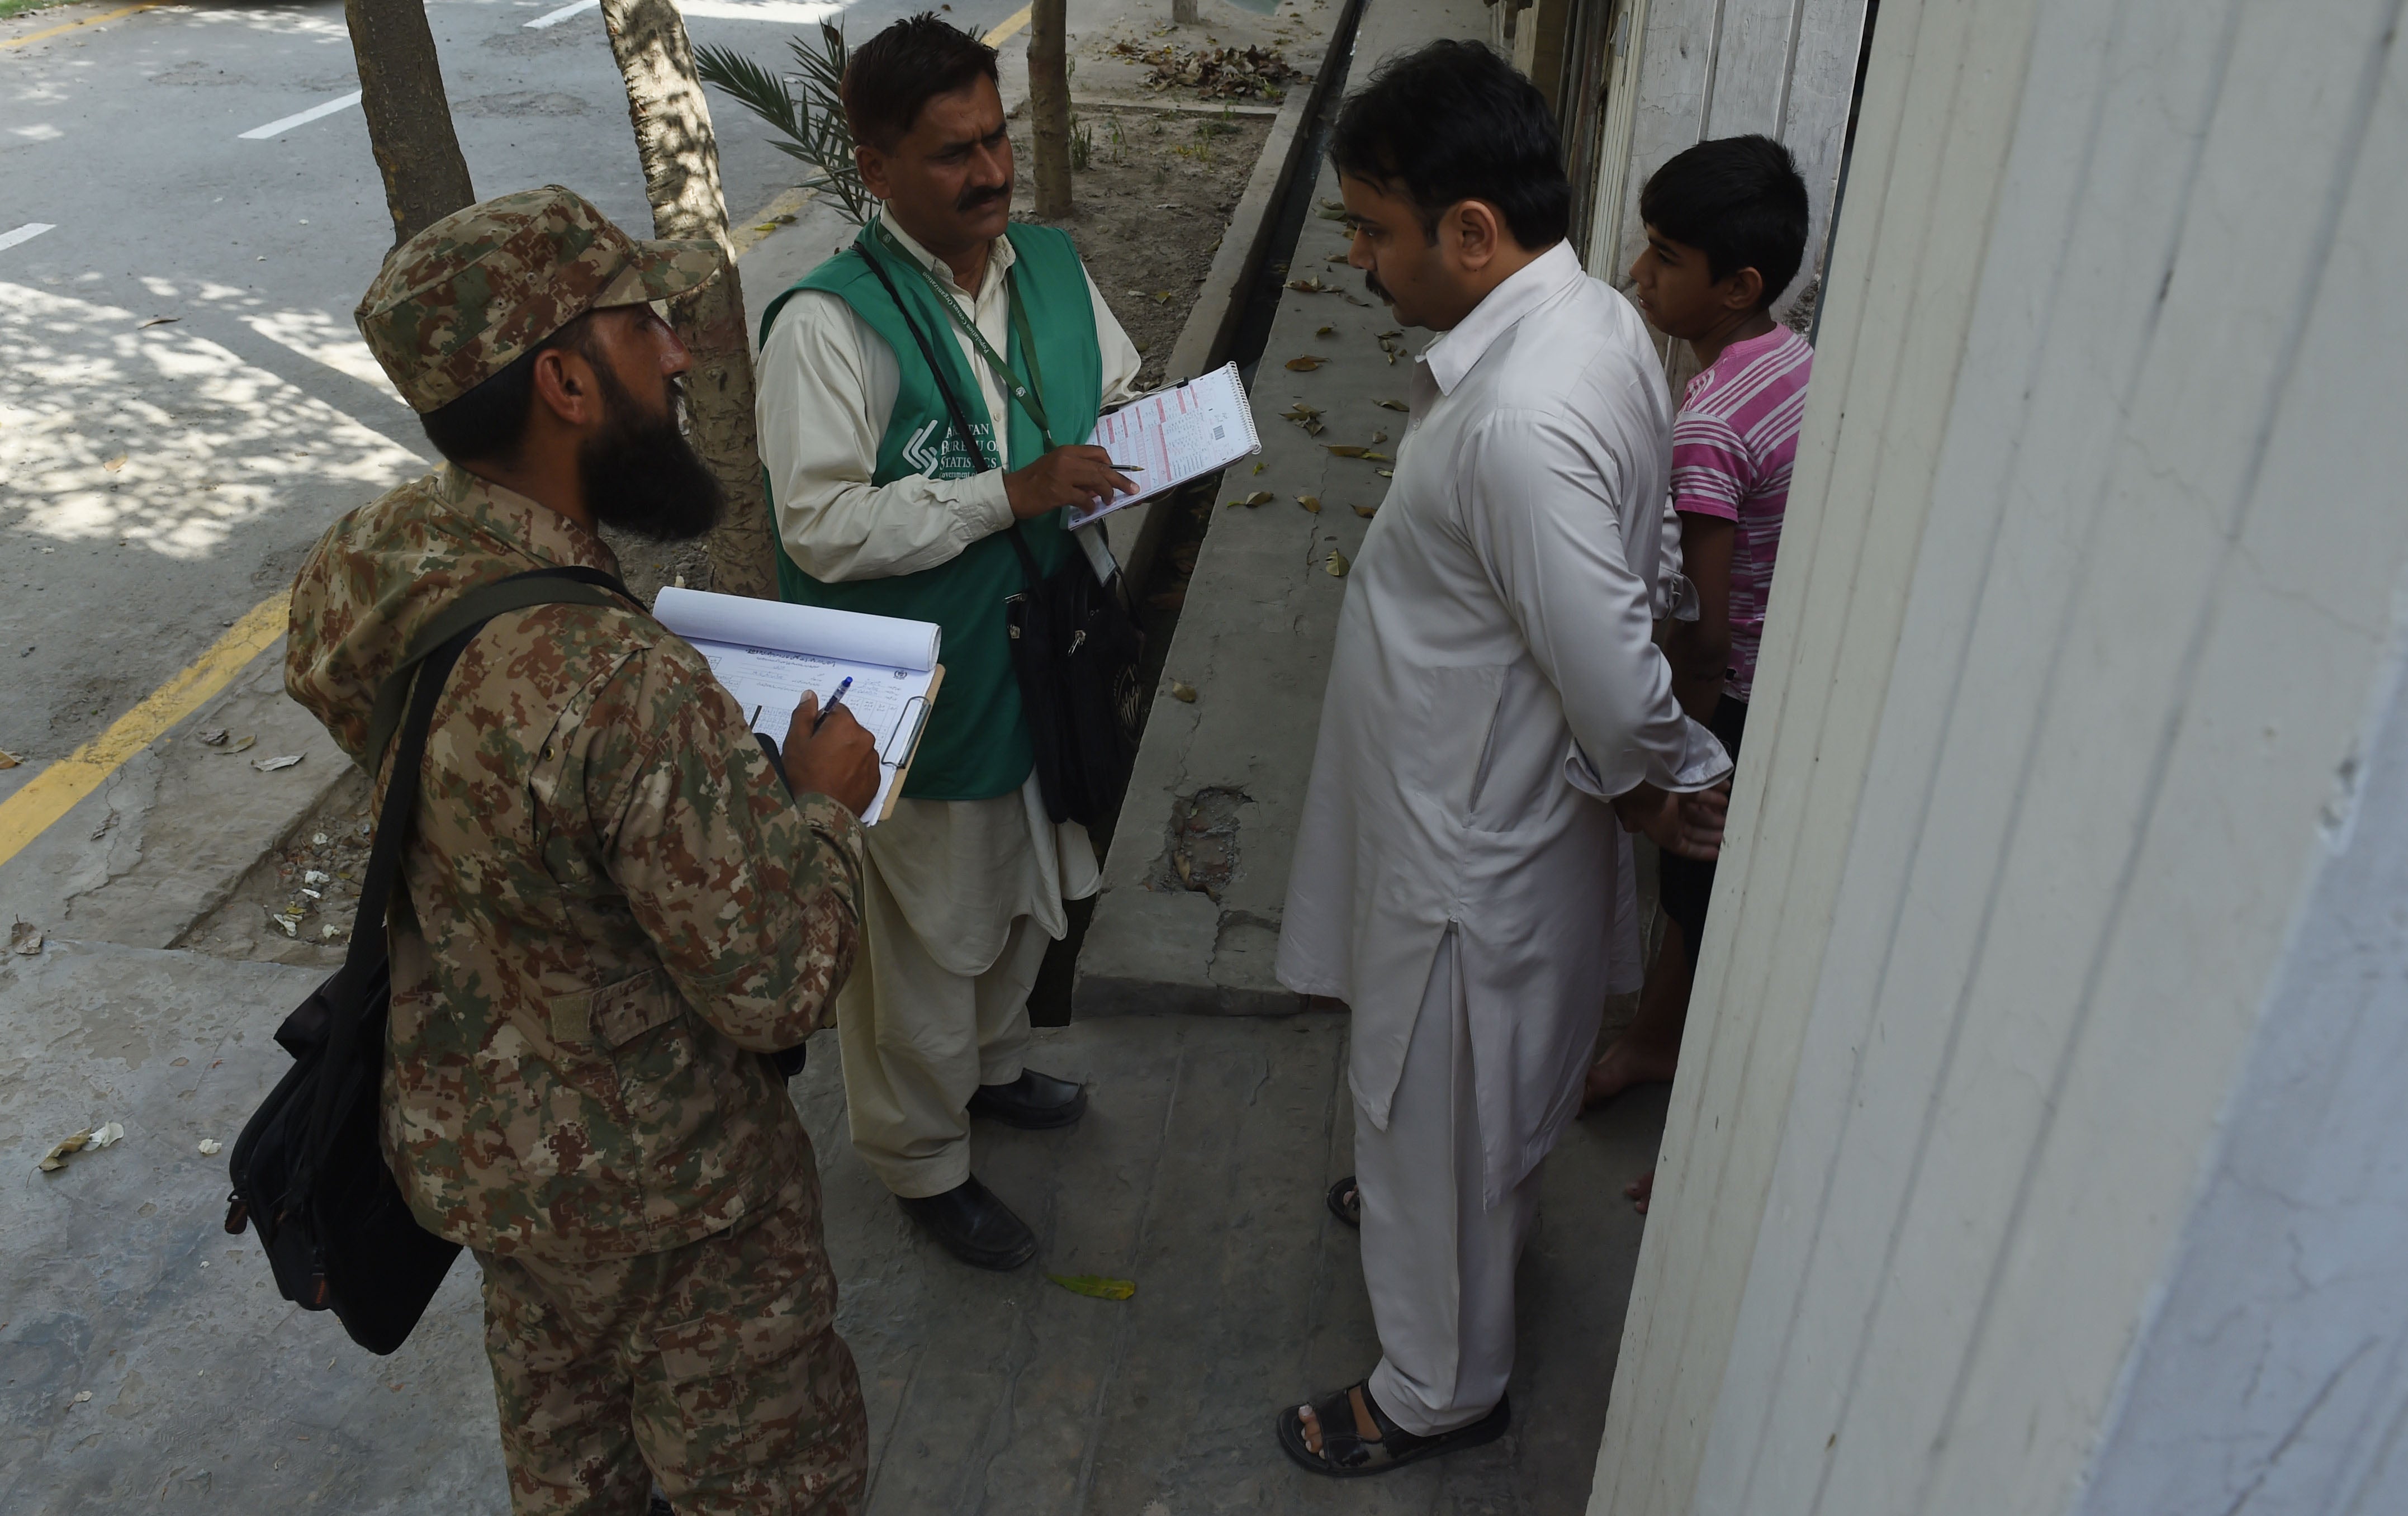 A Pakistan Bureau of Statistics official and a soldier collect census information from an Ahmadi resident in Rabwah, Punjab, Pakistan in March 2017. © 2017 ARIF ALI/AFP via Getty Images